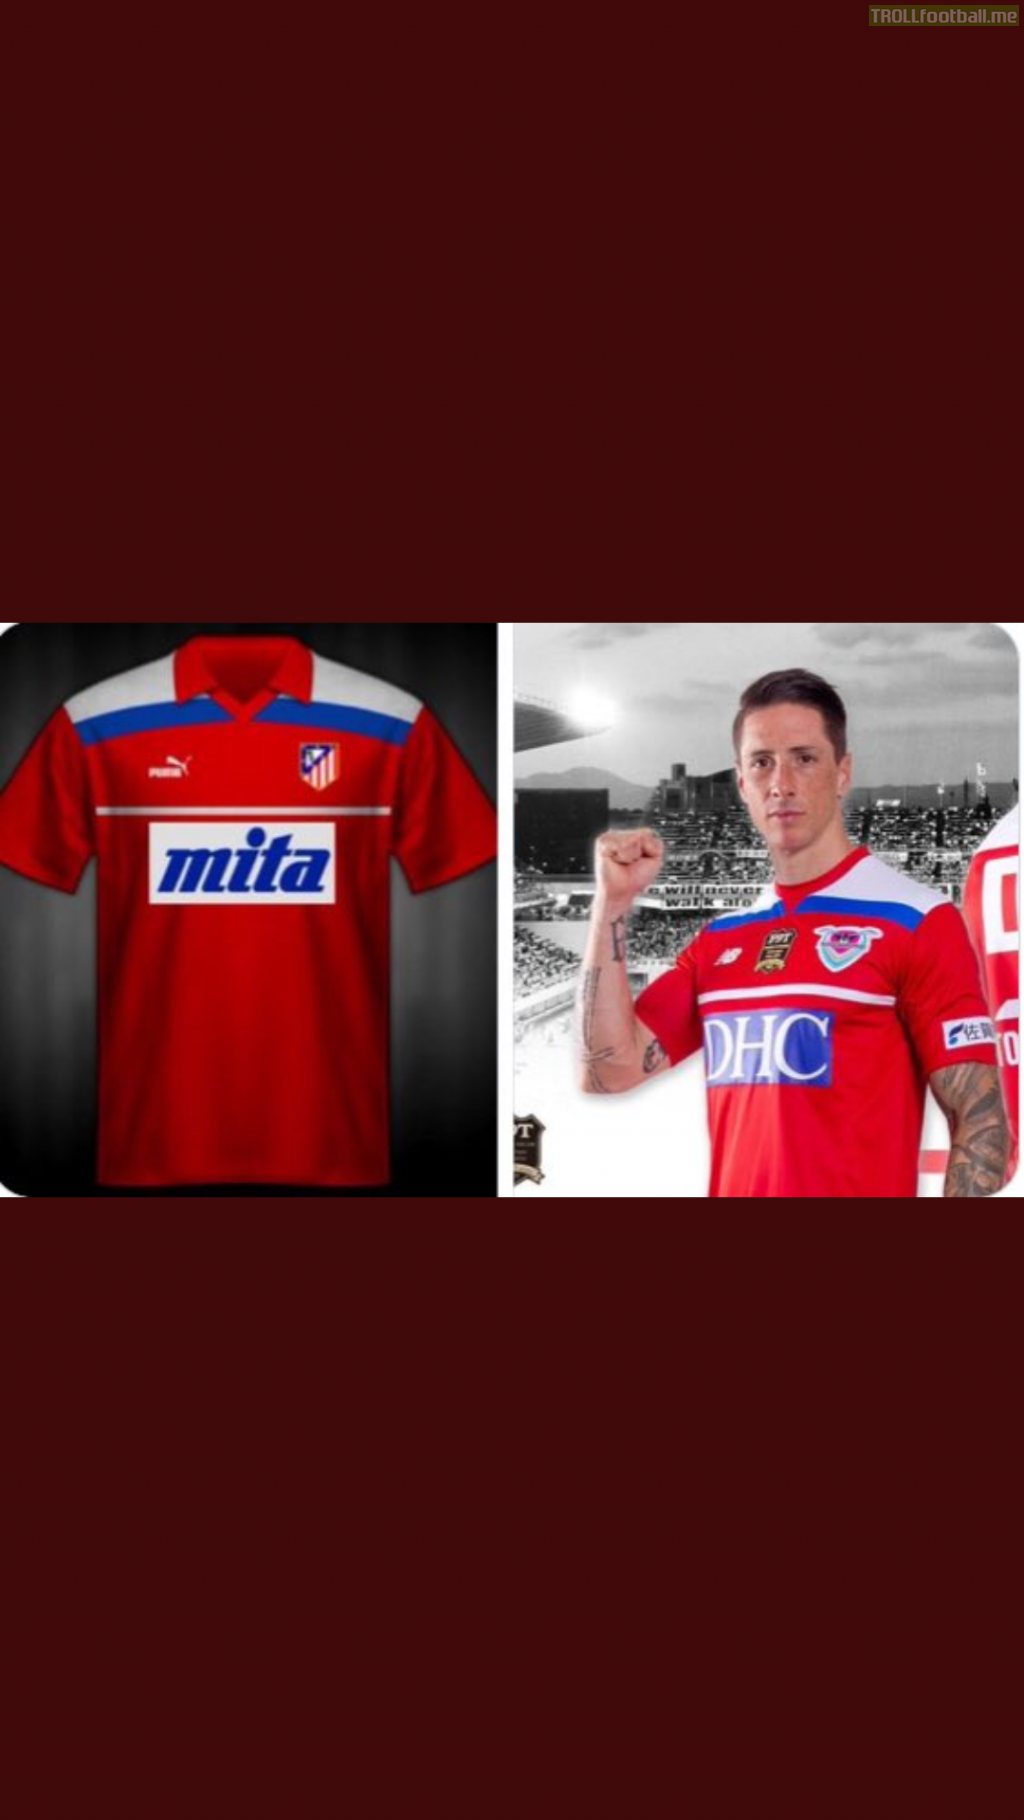 Fernando Torres was allowed by his Japanese club to himself design the shirt he wants to retire in. It isn't hard to see where he got the inspiration from